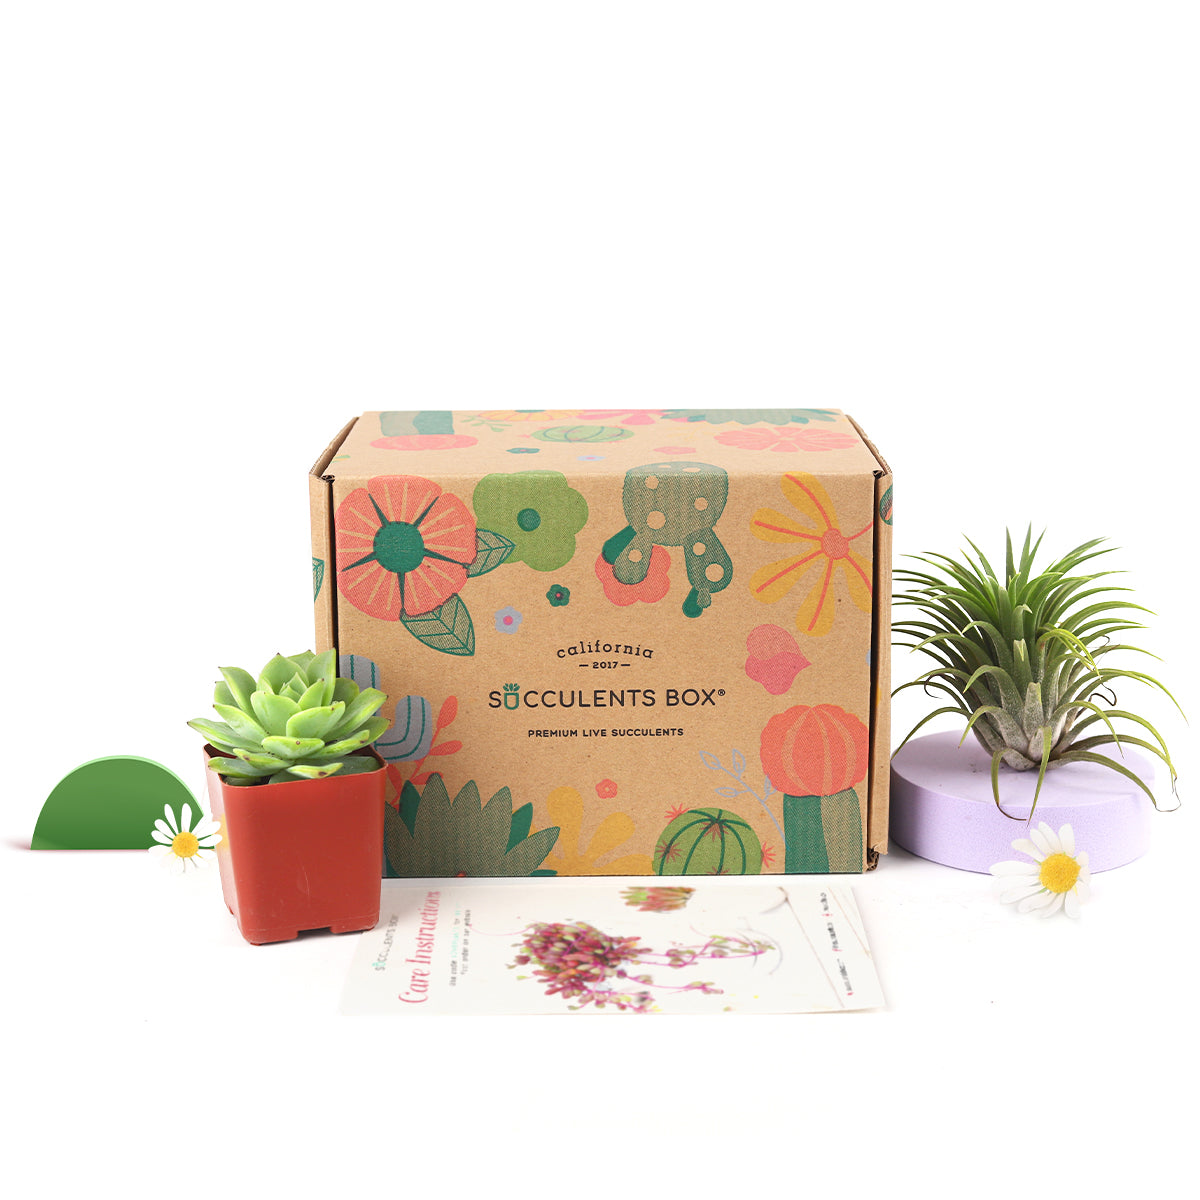 Subscription Box with Care Instruction, Succulent Subscription Box